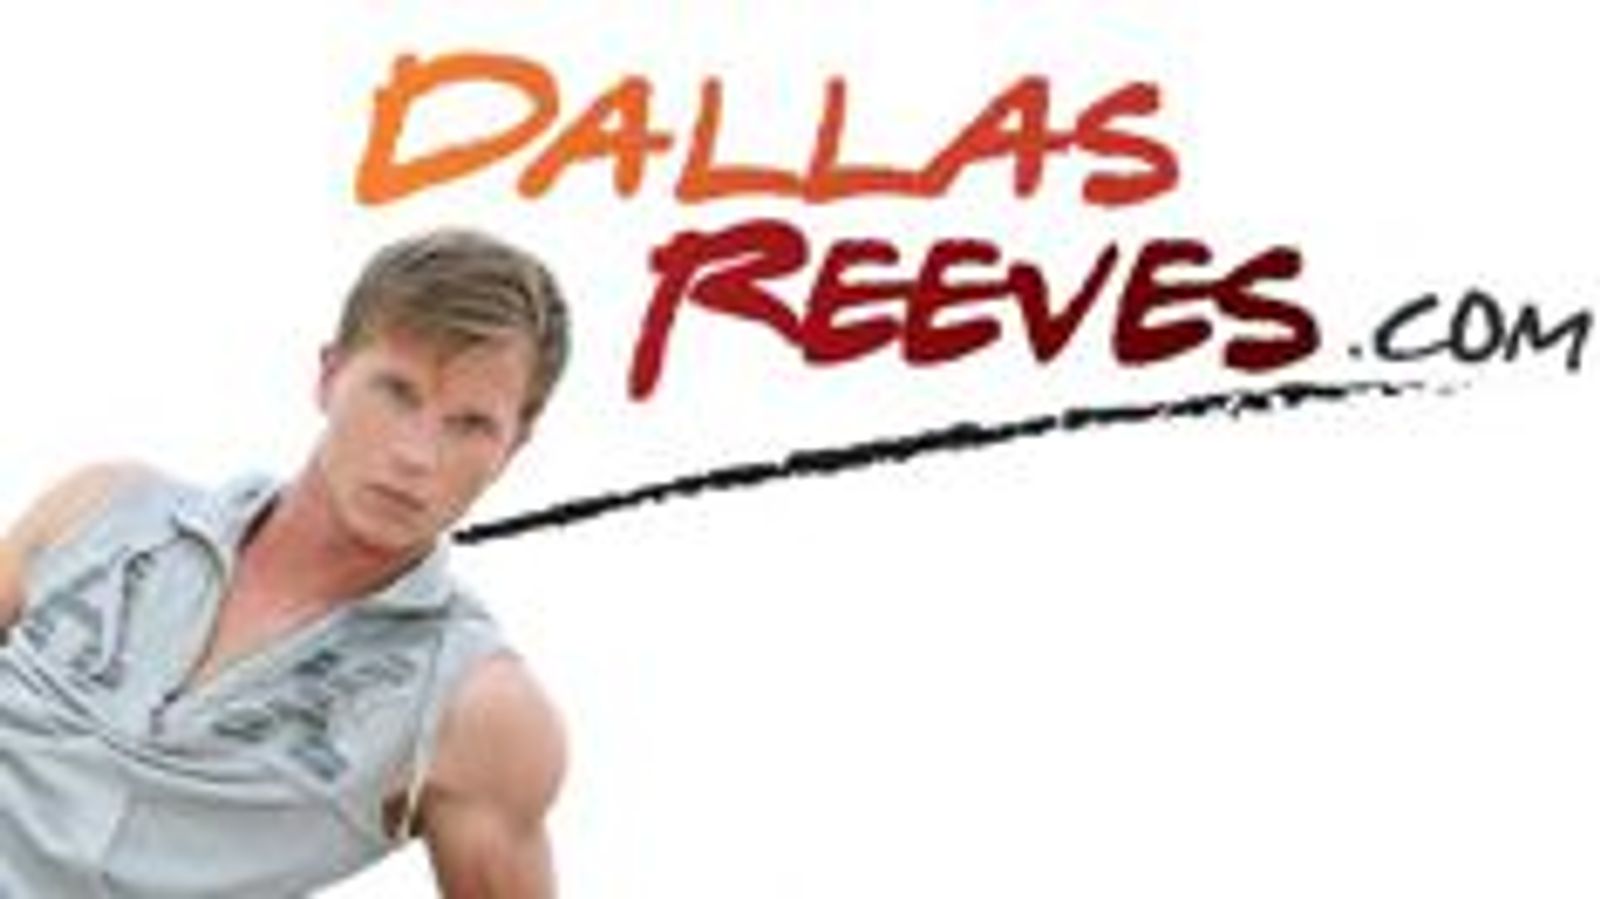 DallasReeves.com Signs New Exclusive, Milo Fisher